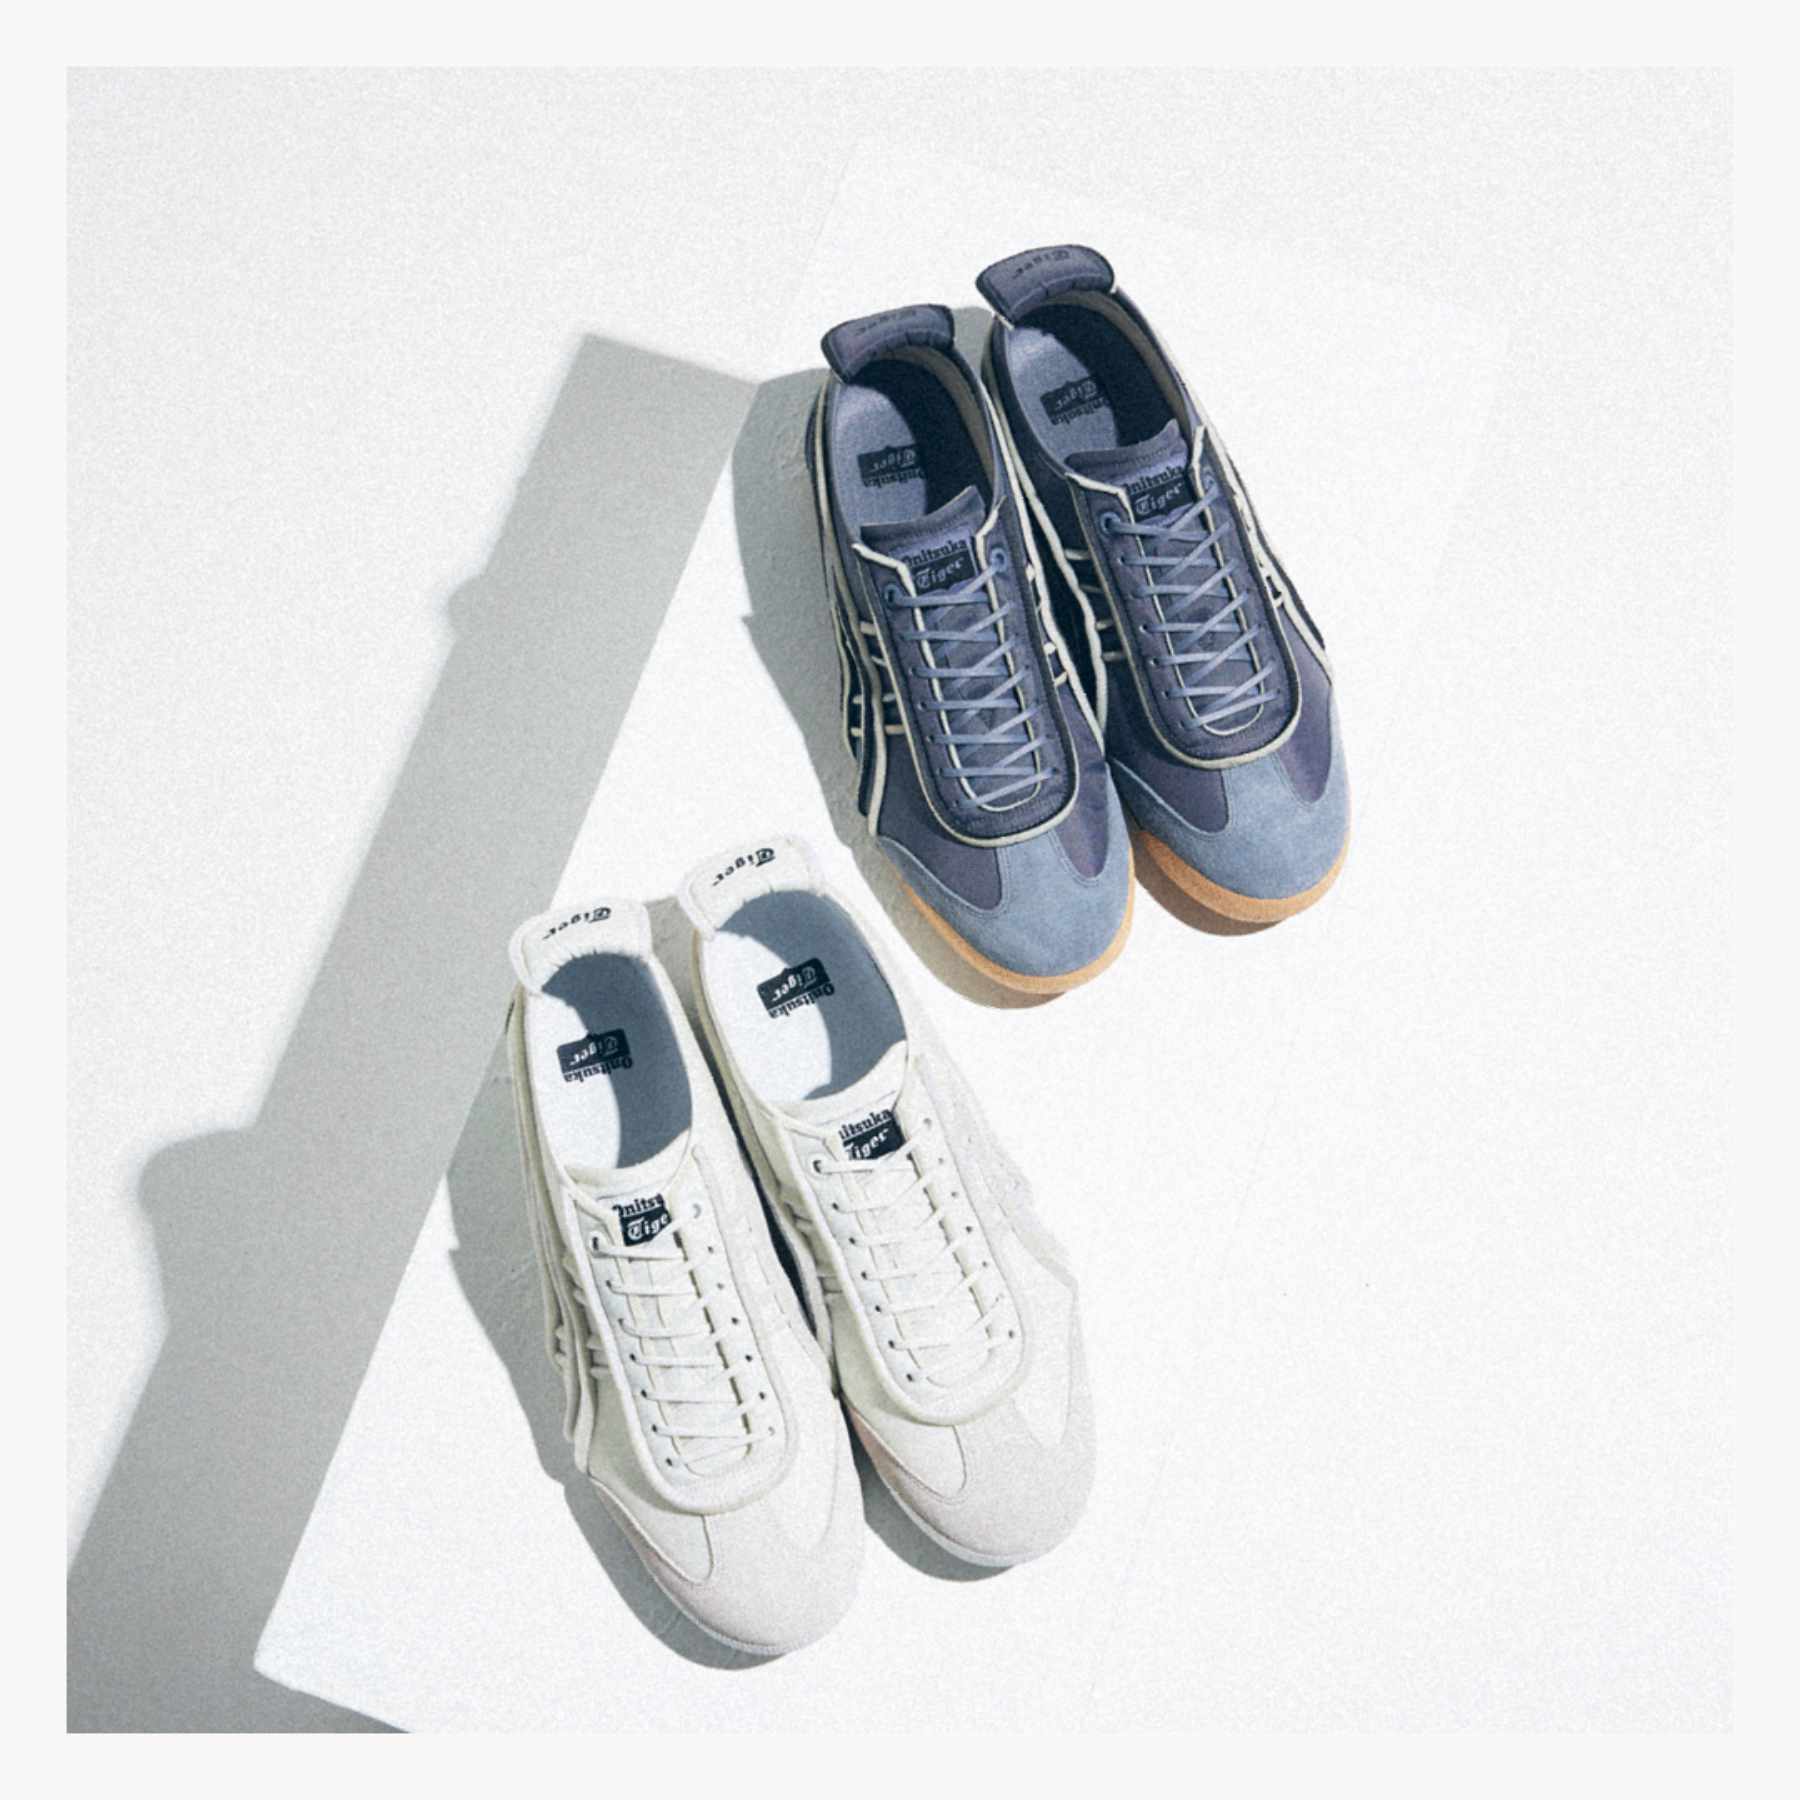 Onitsuka Tiger's Mexico 66 sneaker with a nylon upper in white and navy colorways